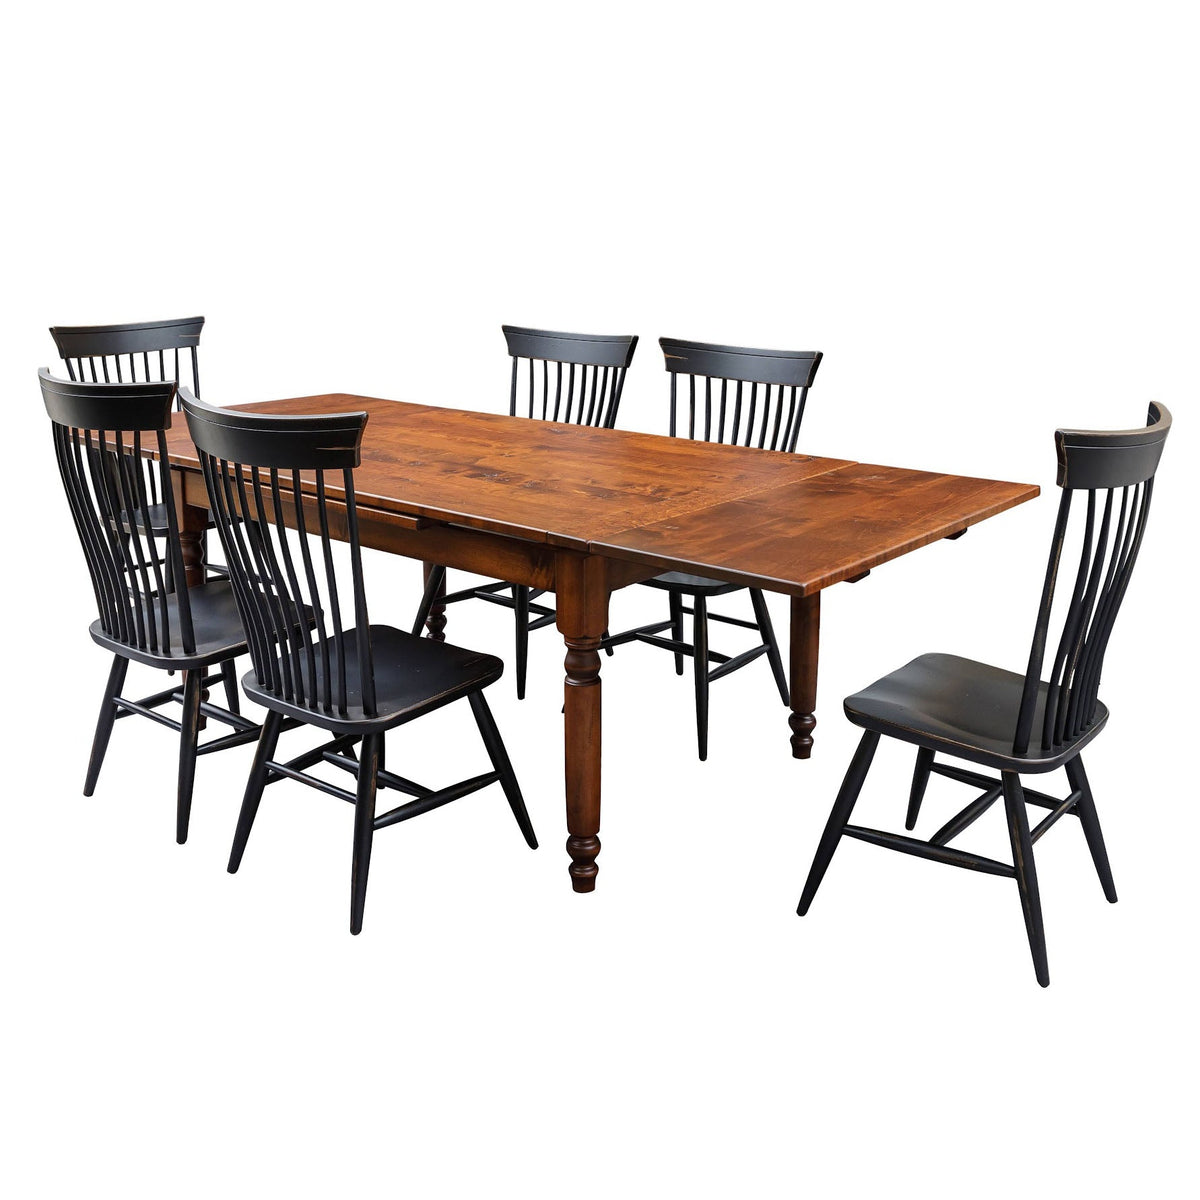 Provence Draw Leaf Table With Black Plymouth Chairs - snyders.furniture